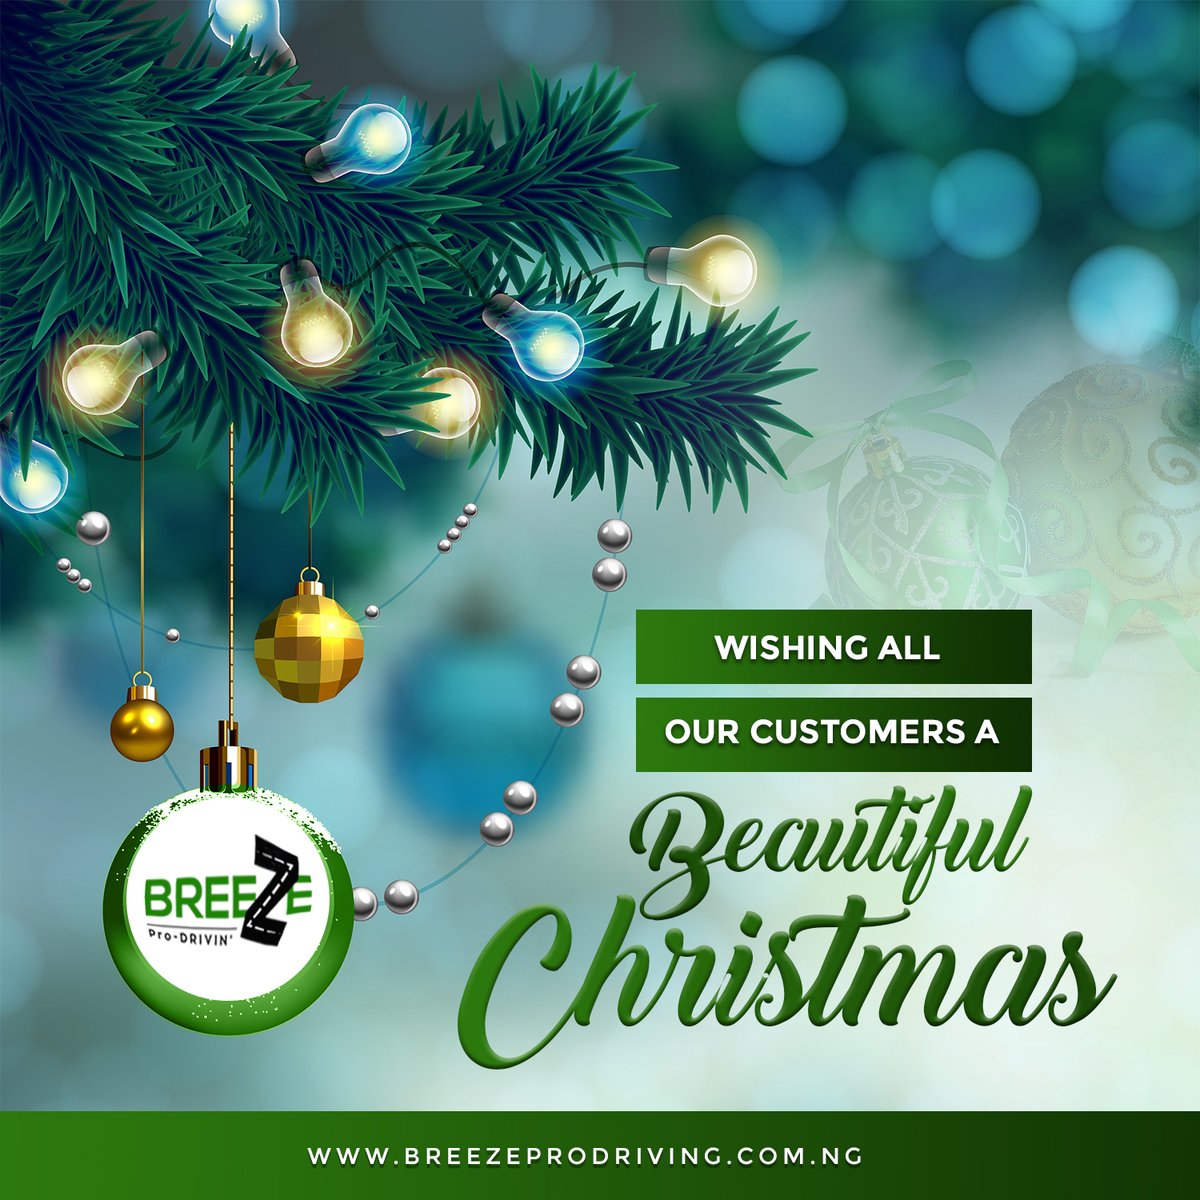 From all of us at BreezeProdriving, wishing all our esteemed customers blessed and merry Christmas, eat, drink, have fun and be happy. 
breezeprodriving.com.ng
#BreezeProdriving #MerryChristmas #BeutifullChristmas #EsteemedCustomers #HaveFun #BeHappy